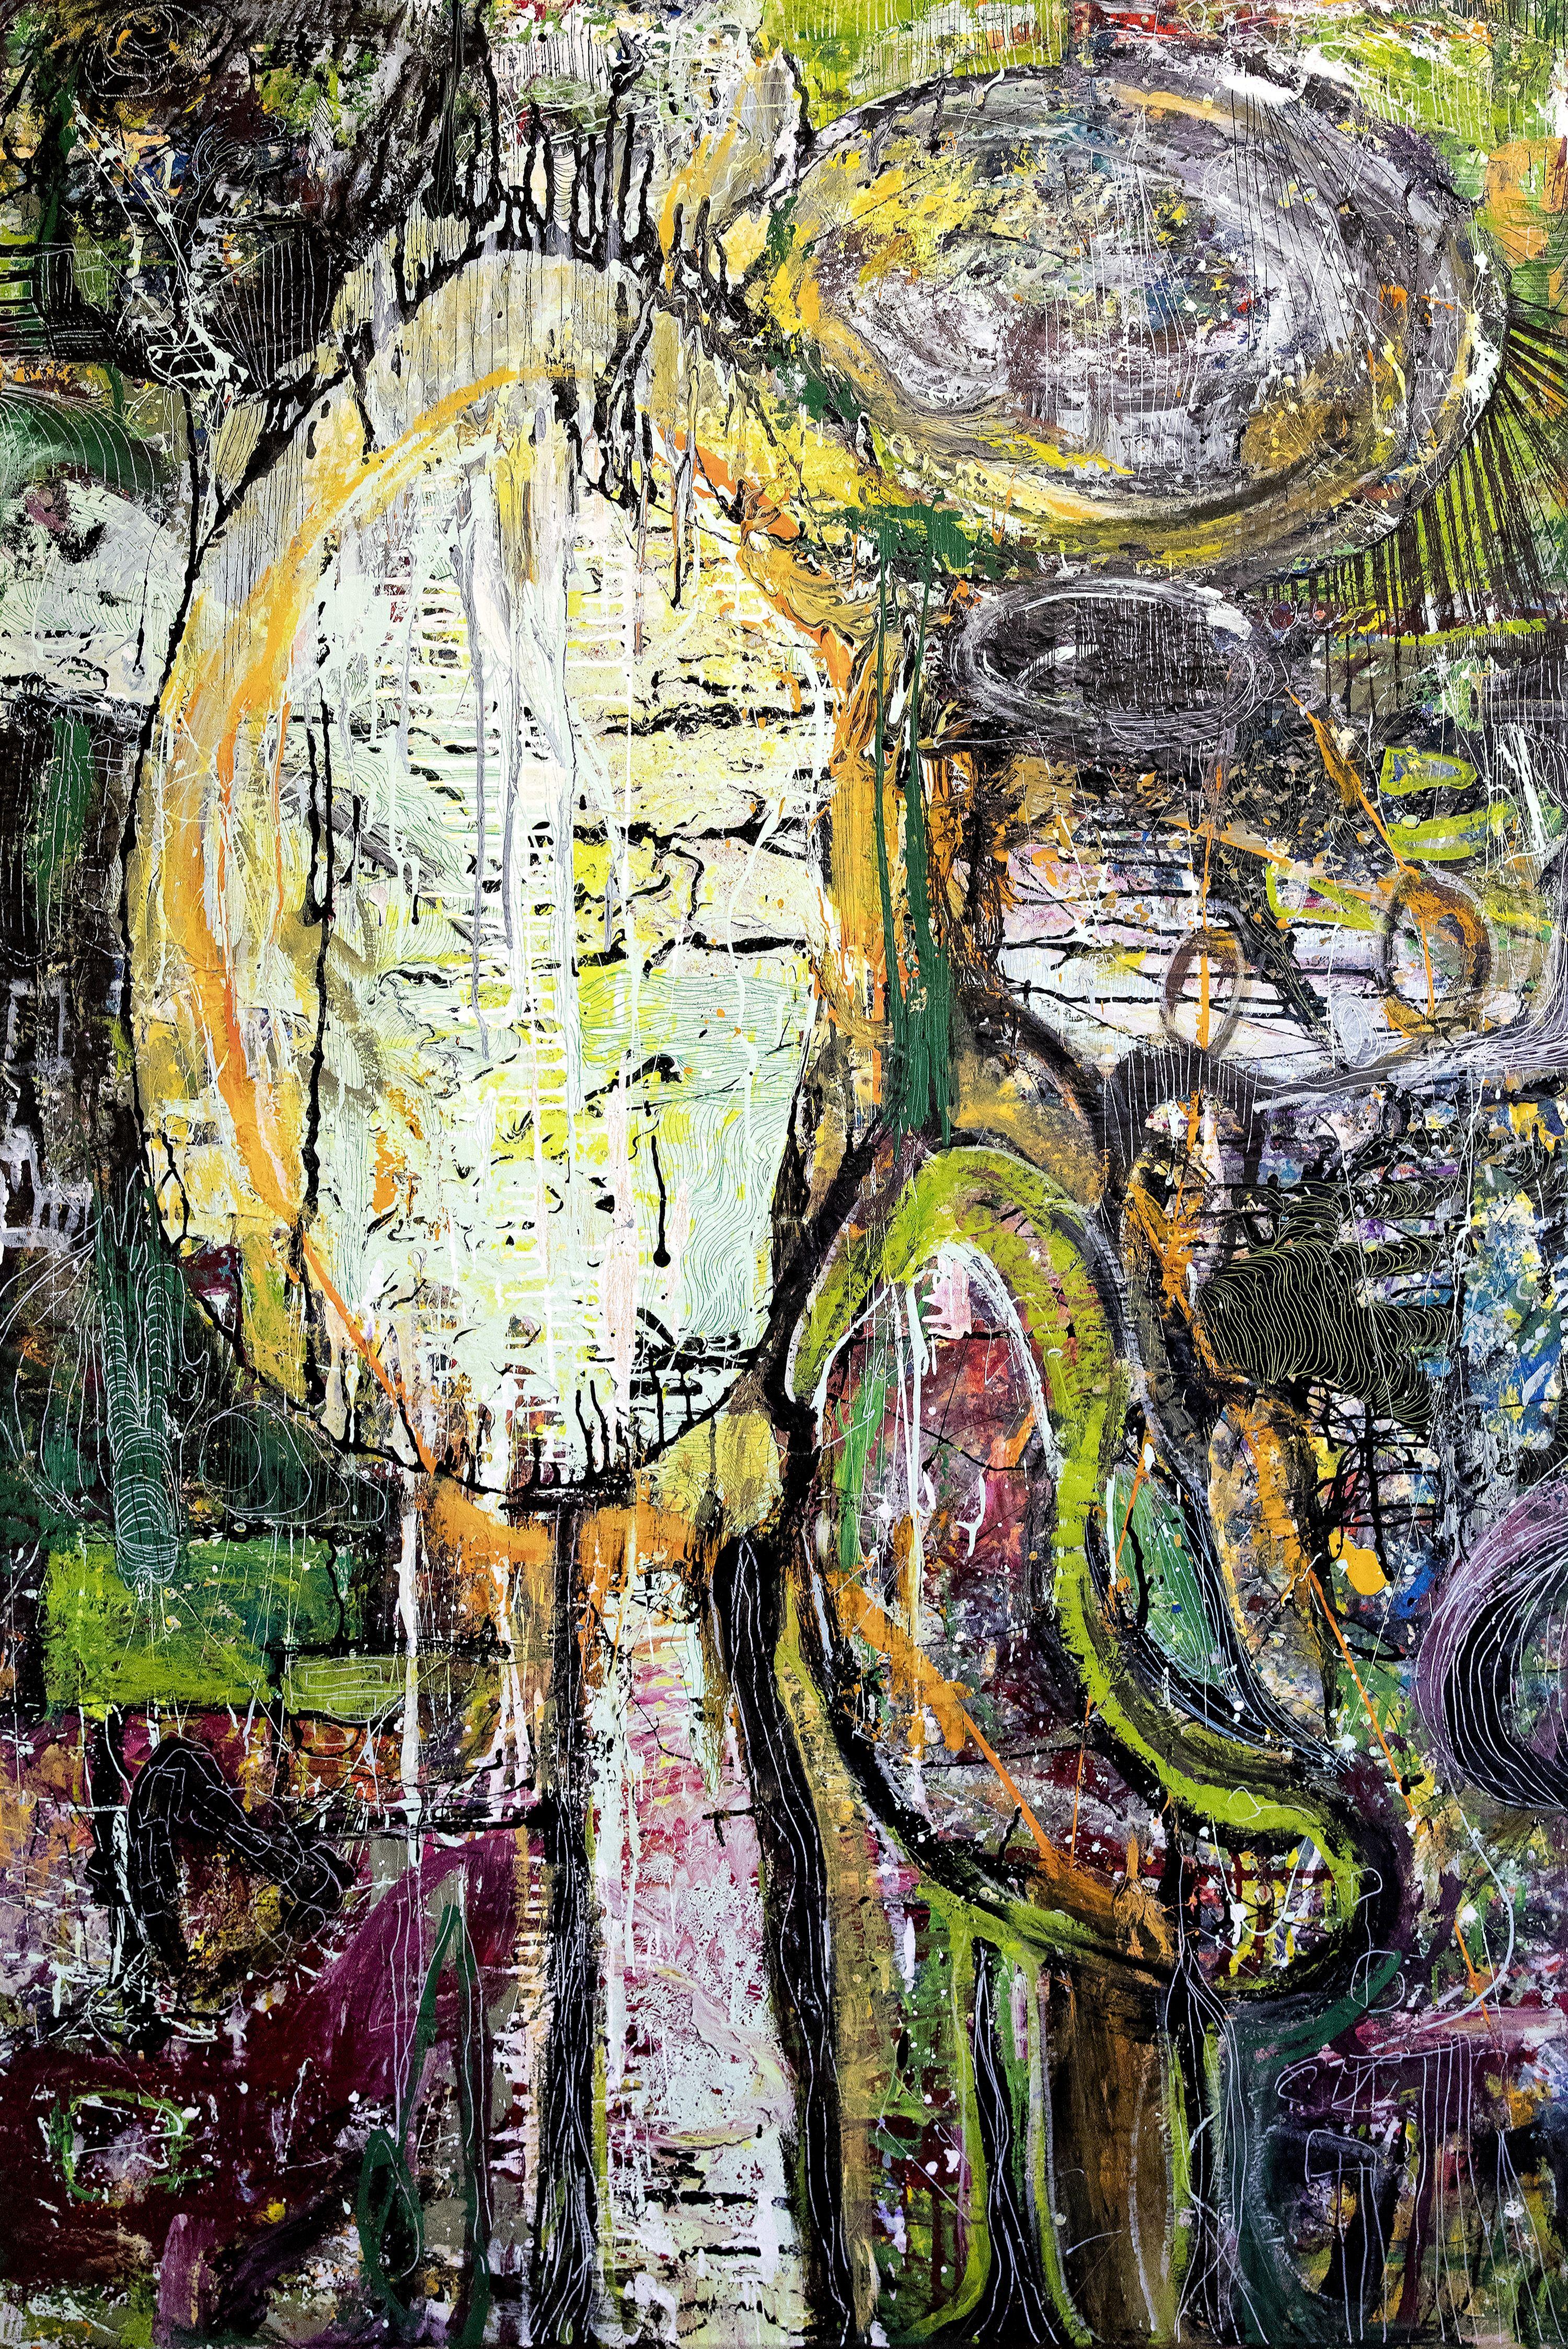 Abstract Painting Robert Musser - Mind Green Mind, Peinture, Acrylique sur Toile